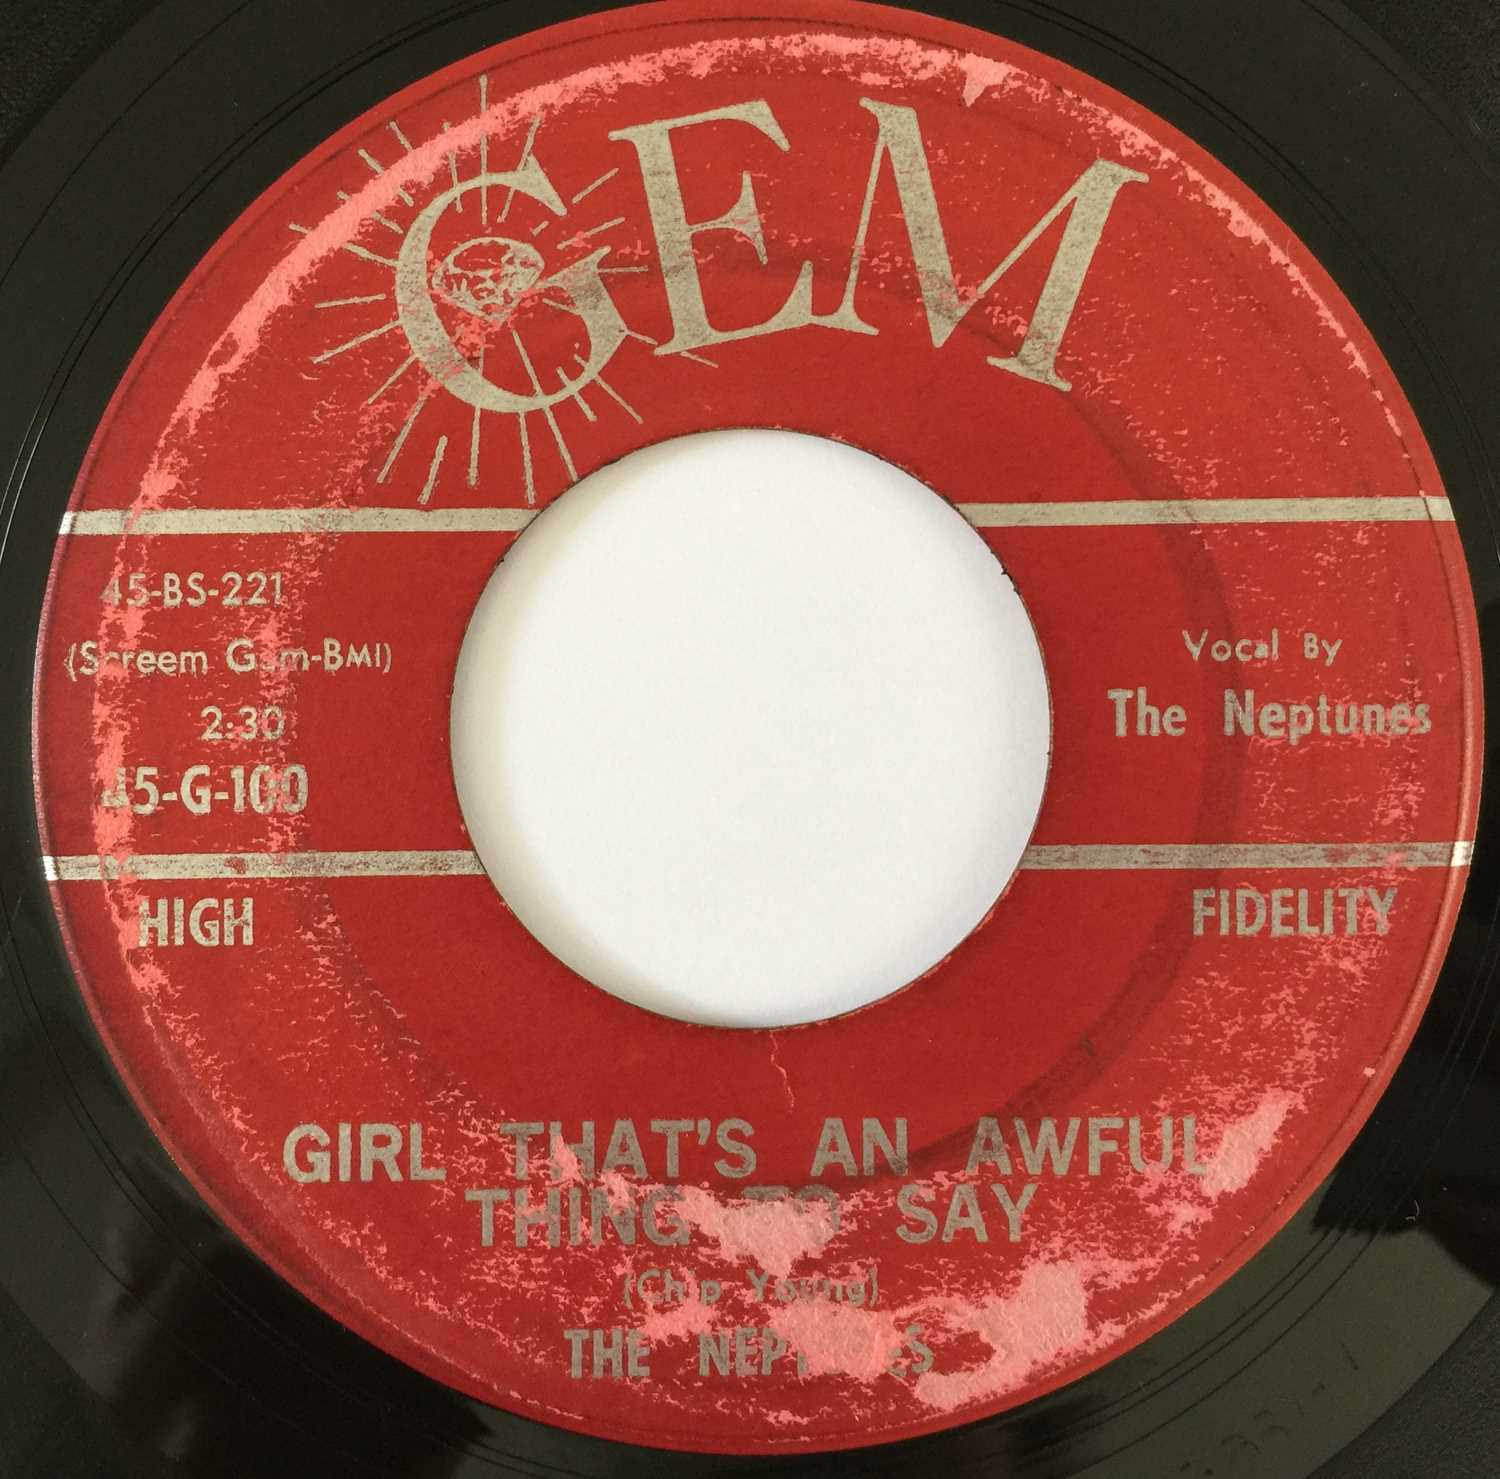 Lot 17 - THE NEPTUNES - GIRL THAT'S AN AWFUL THING TO SAY / TURN AROUND 7" (US SOUL - GEM 45-G-100)